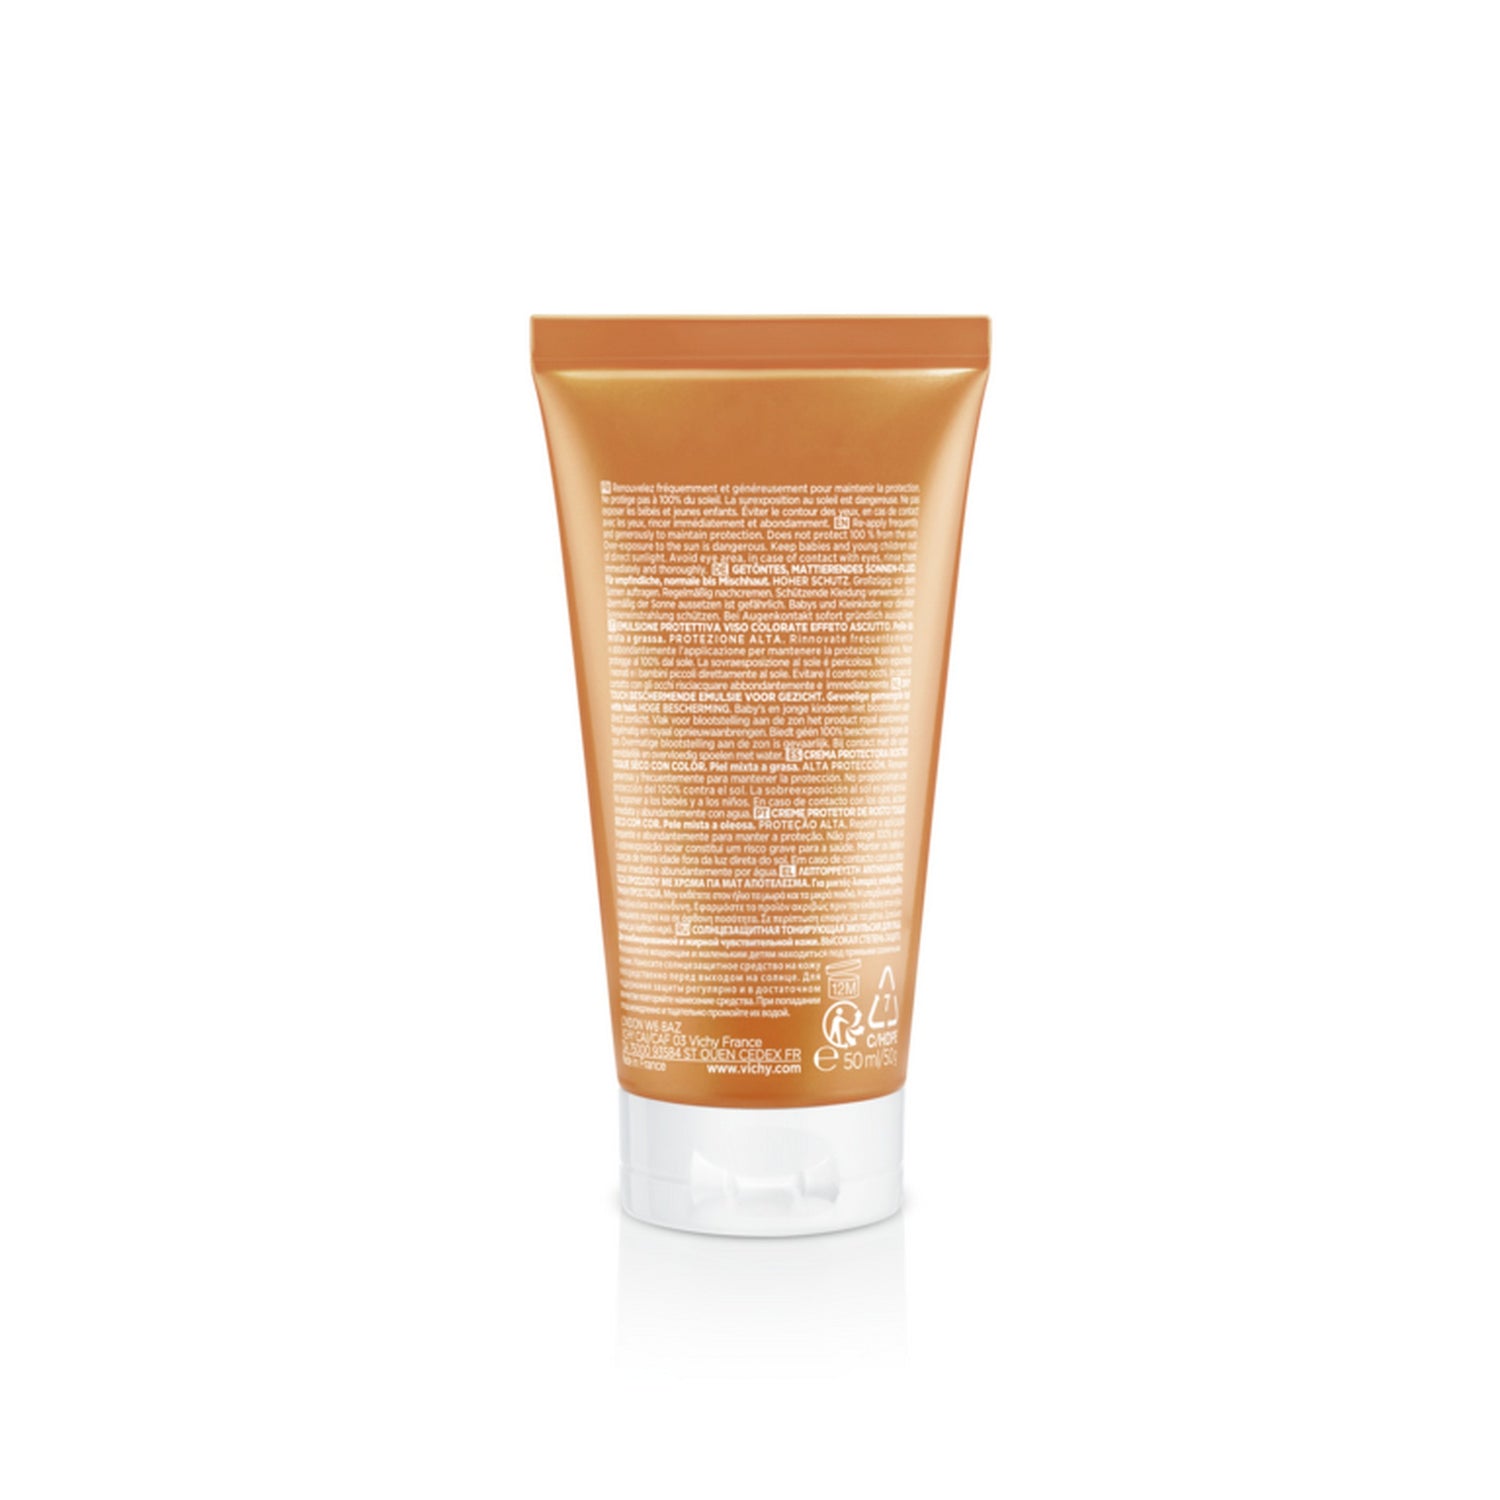 Vichy Capital Soleil Dry Touch Mattifying BB Tinted Sun Protection SPF50 for Face 50ml Back